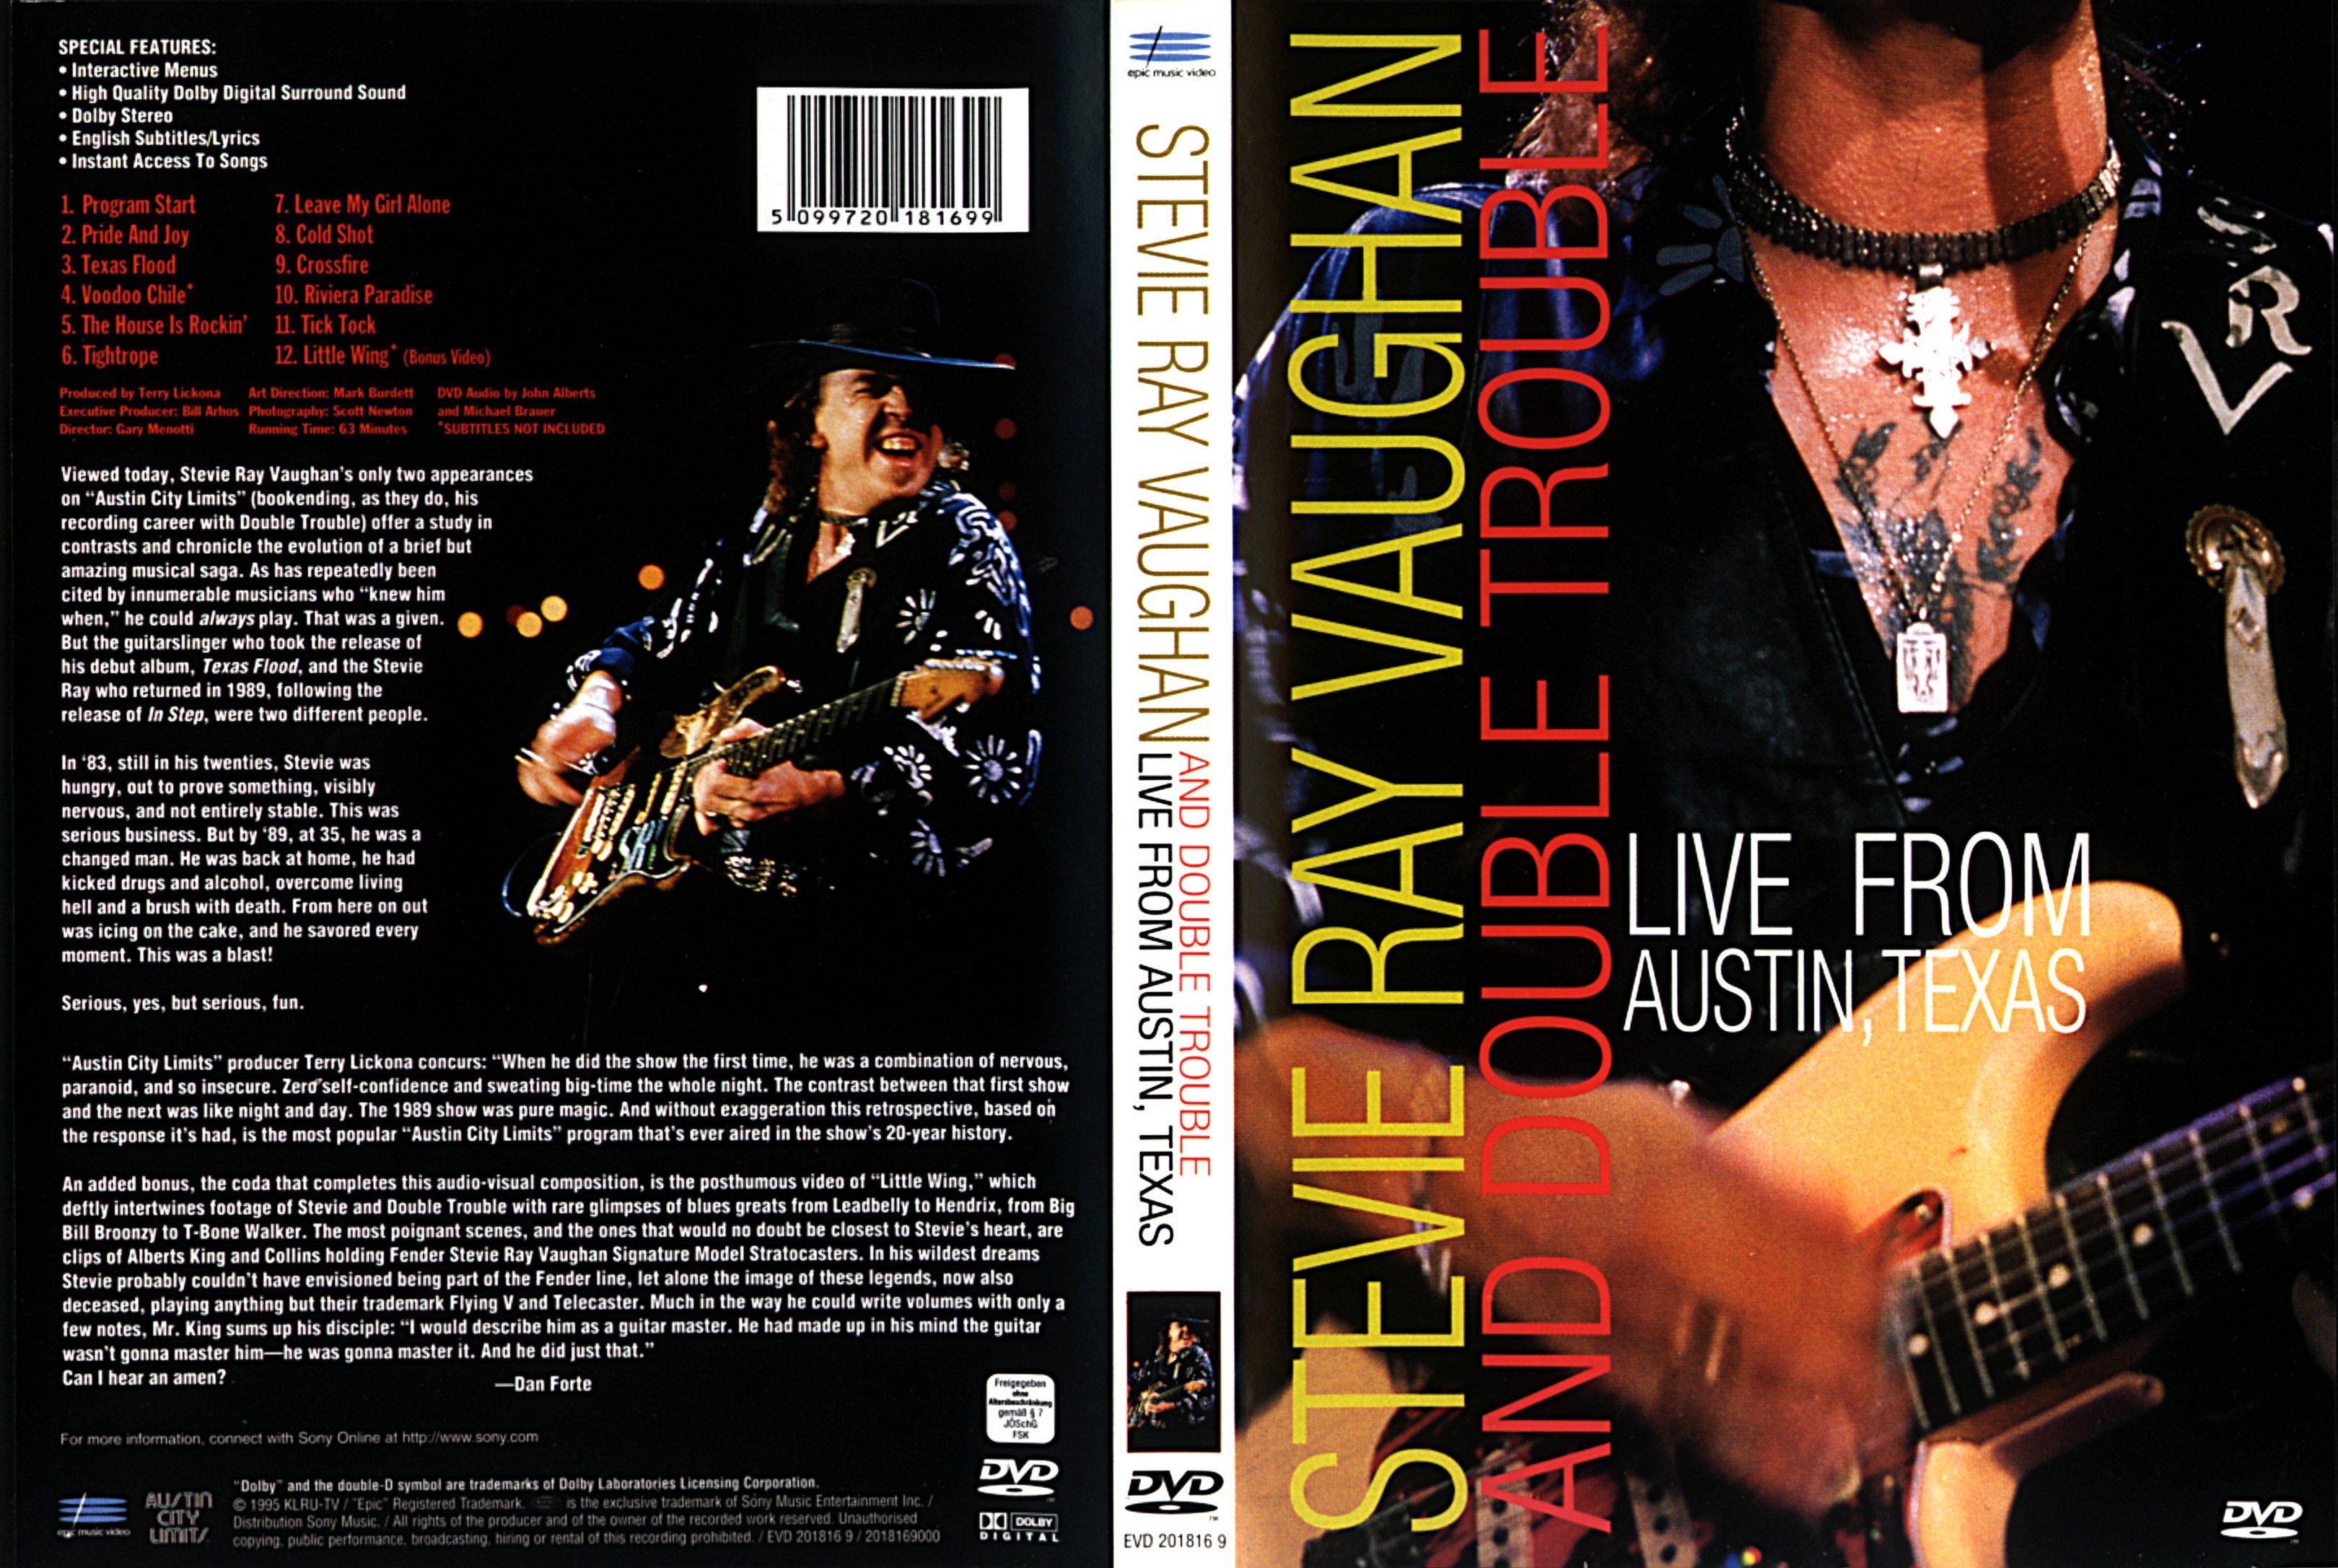 Jaquette DVD Stevie Ray Vaughan and double trouble - Live from Austin Texas